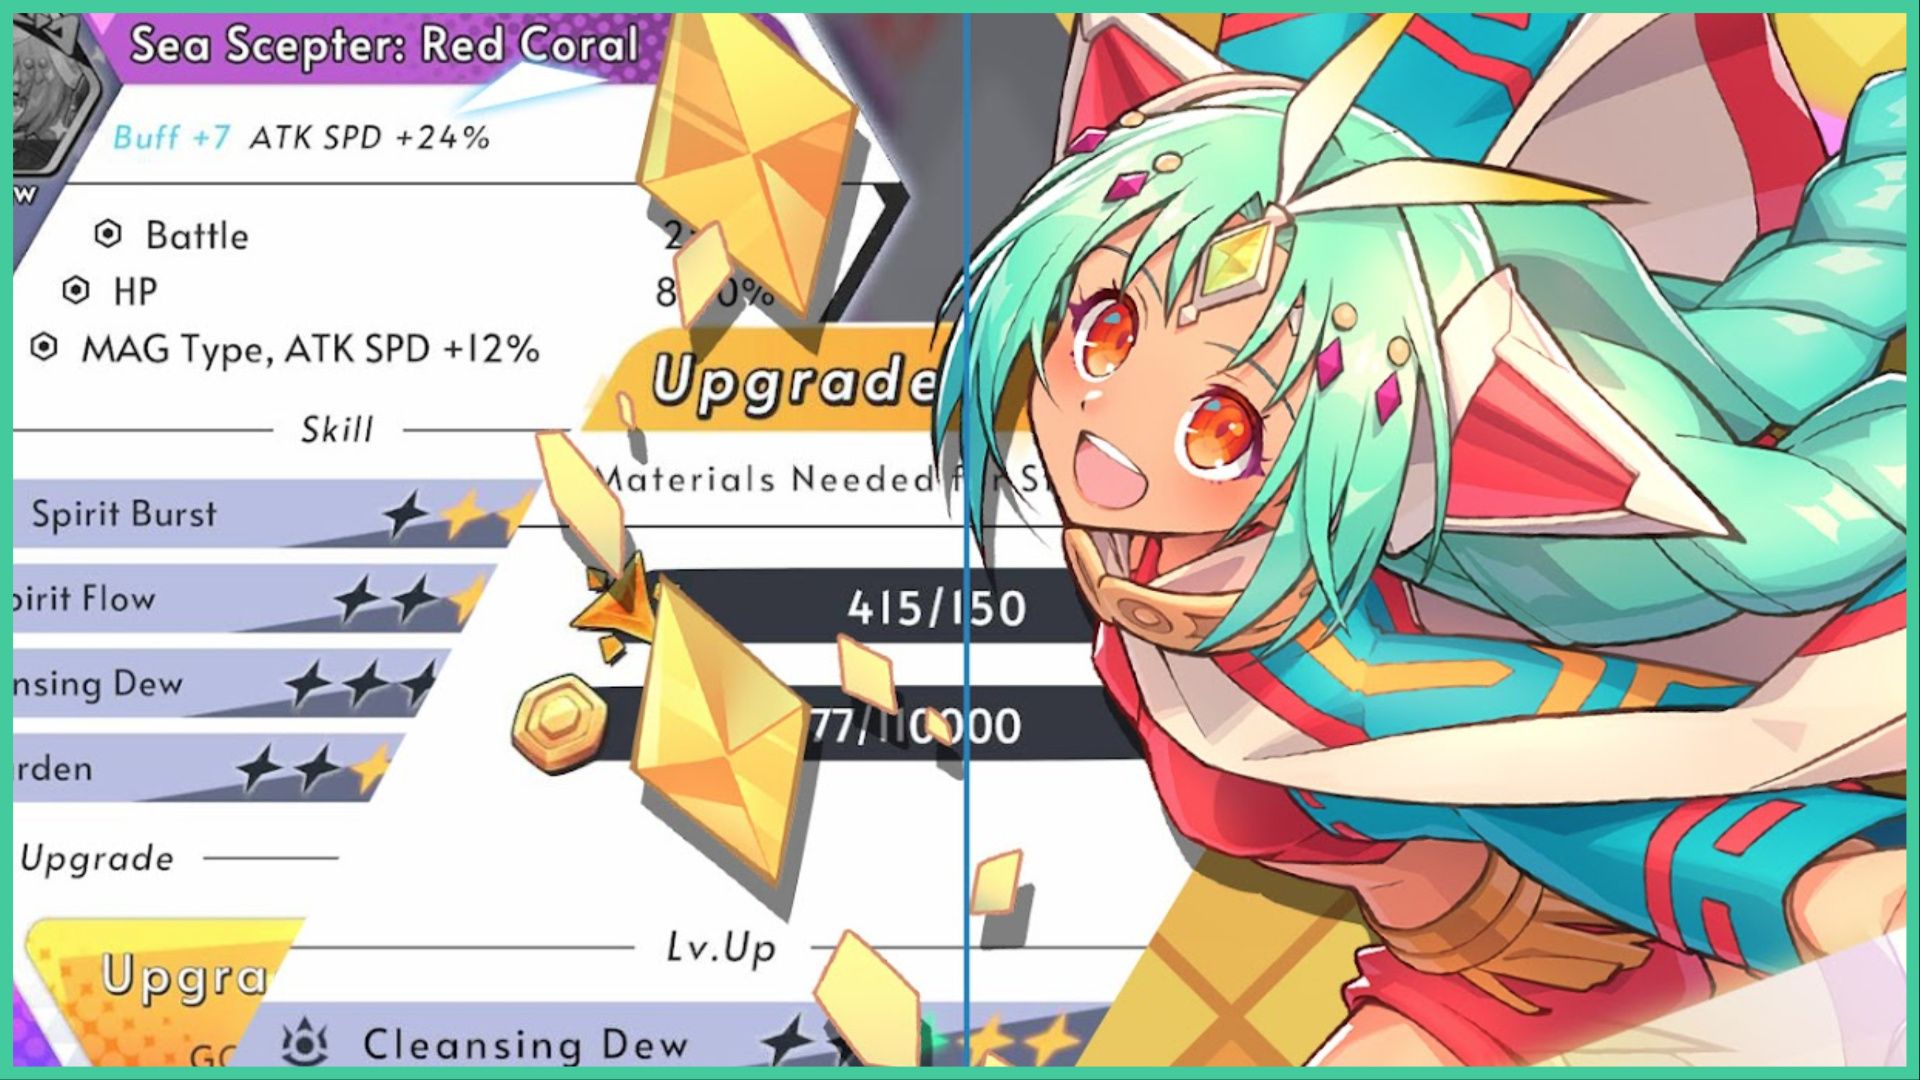 feature image for our knightcore: sword of kingdom codes, the image features promo art for the game of a character with a gem on her forehead and in her hair as she smiles, there is a screenshot of the character upgrade screen behind her, which is cut off as the character art blocks some of the words, the character also has floating diamonds around her